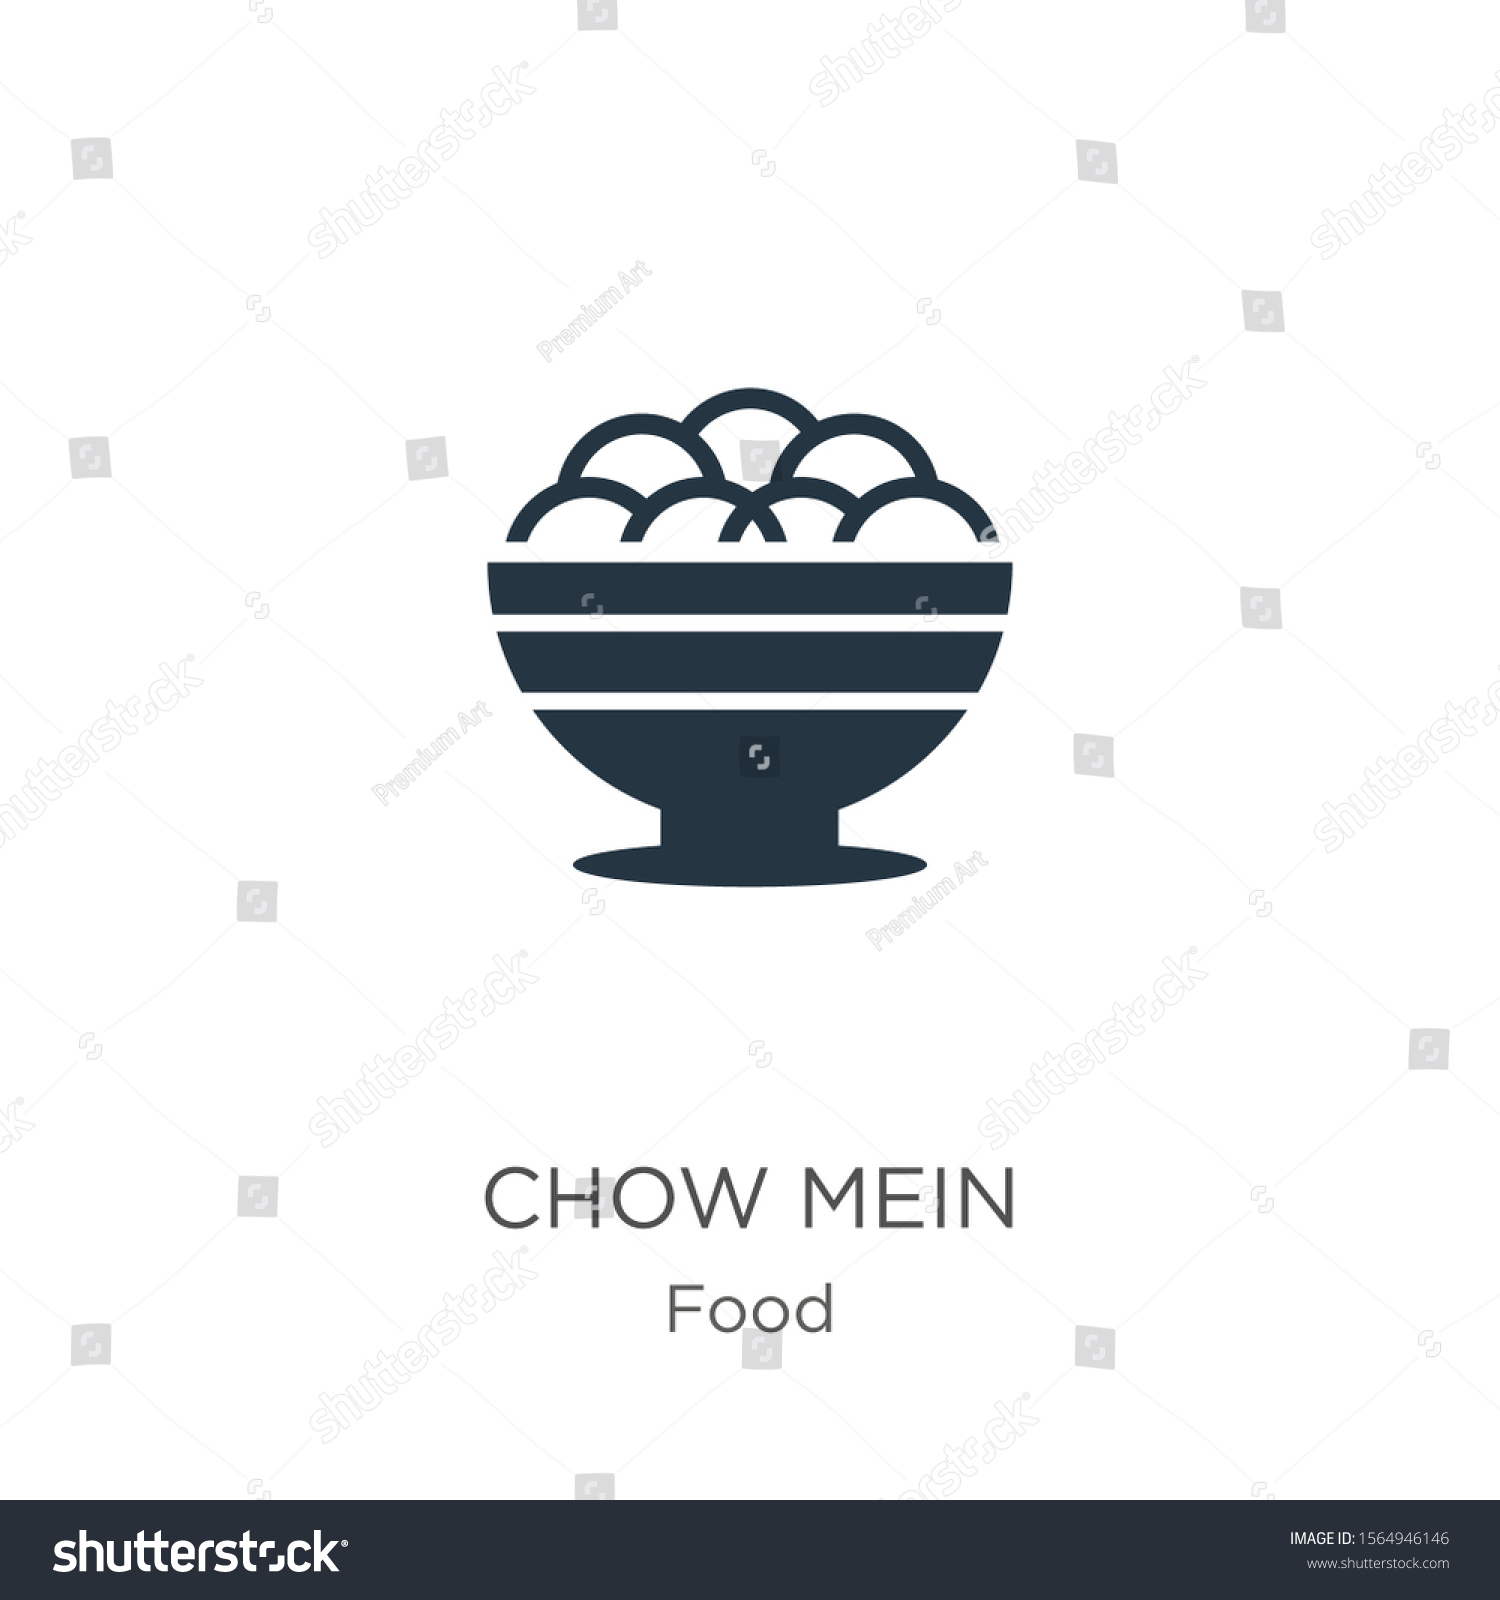 SVG of Chow mein icon vector. Trendy flat chow mein icon from food collection isolated on white background. Vector illustration can be used for web and mobile graphic design, logo, eps10 svg